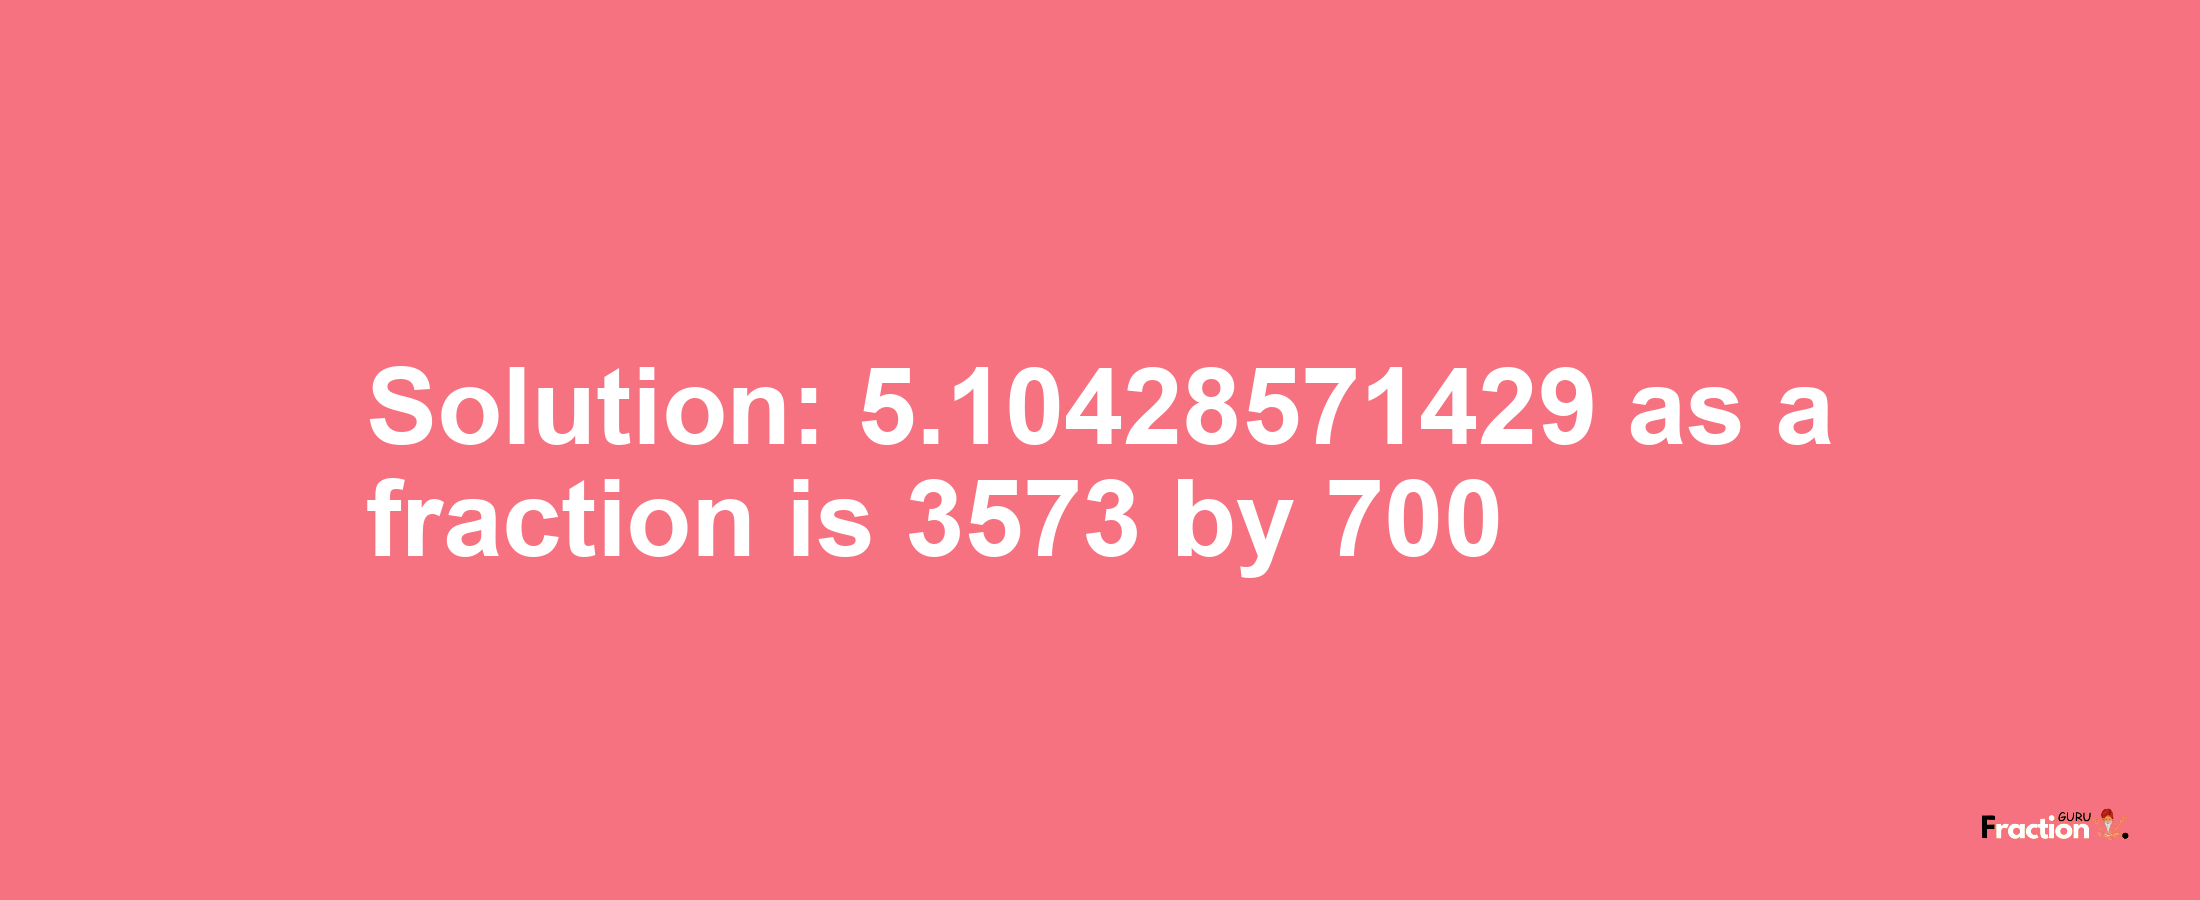 Solution:5.10428571429 as a fraction is 3573/700